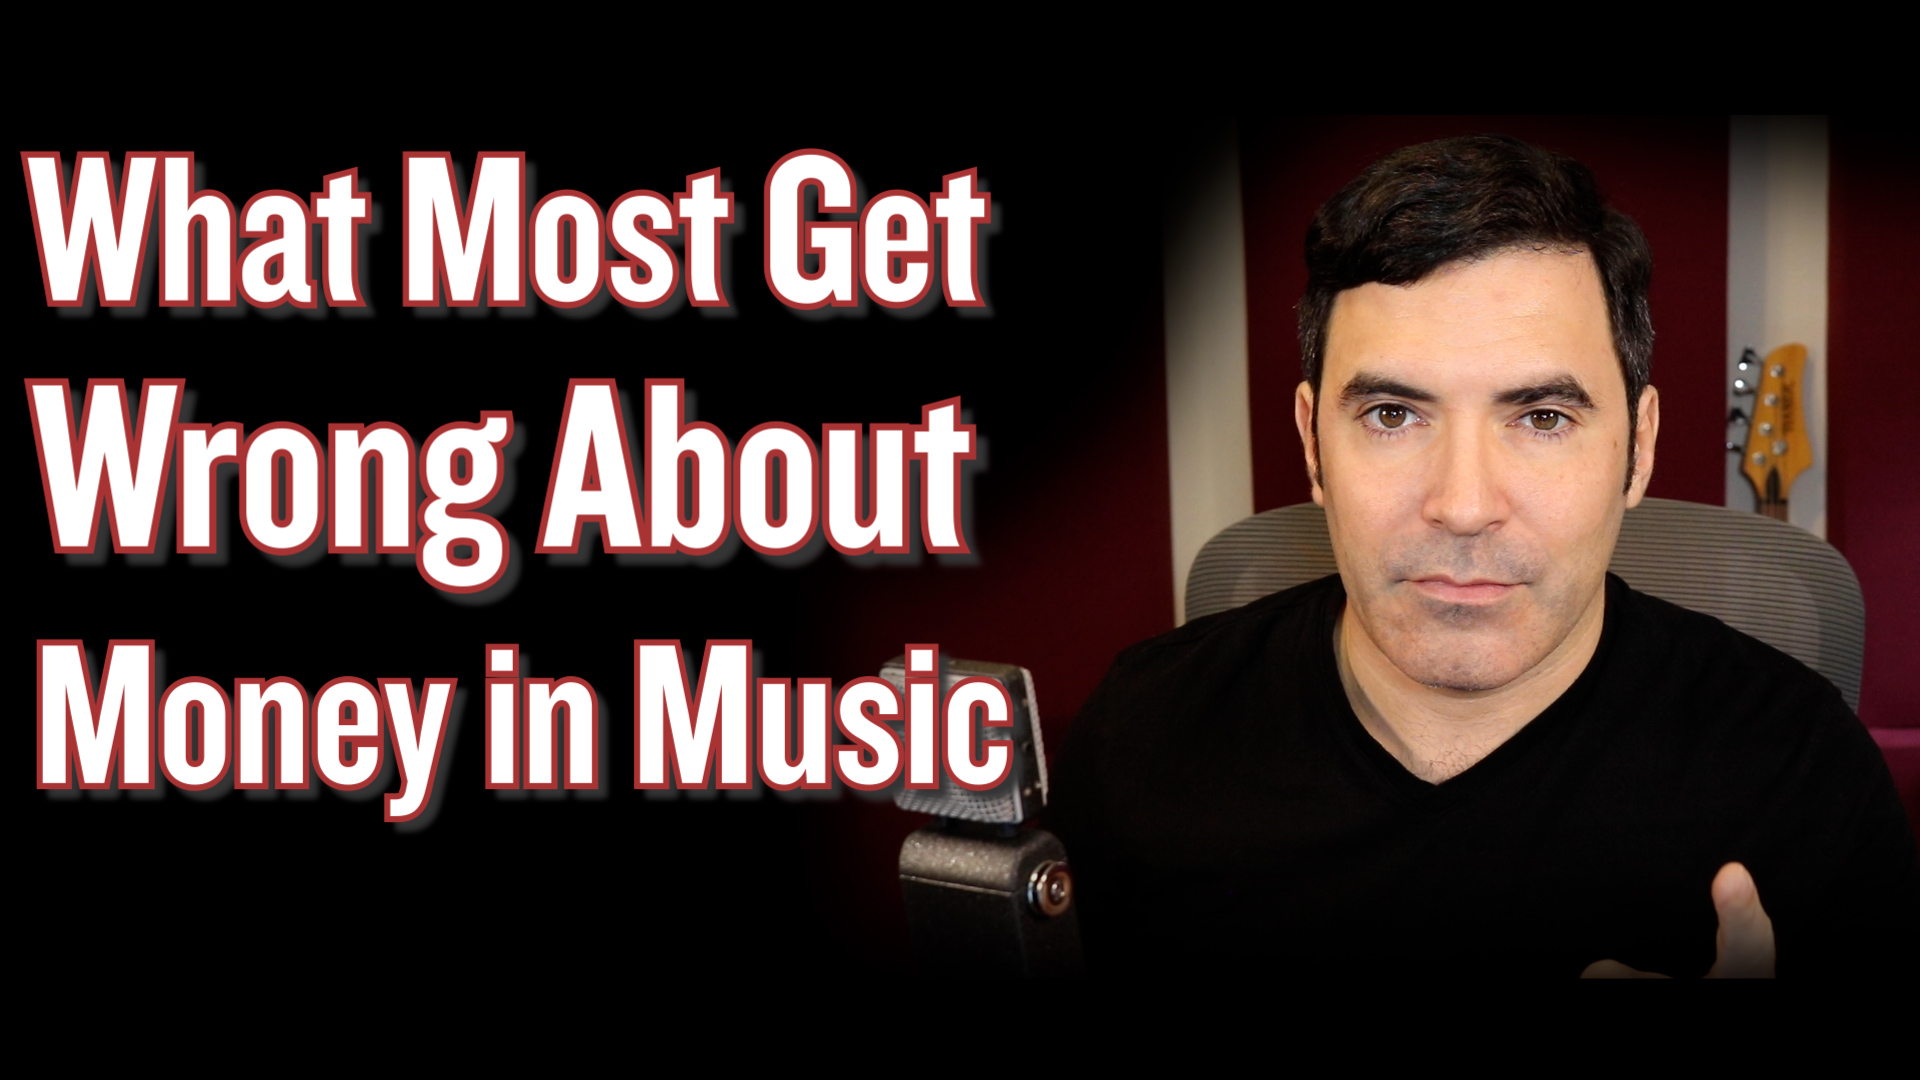 Why it’s so hard to make money in music. (And what to do about it.)